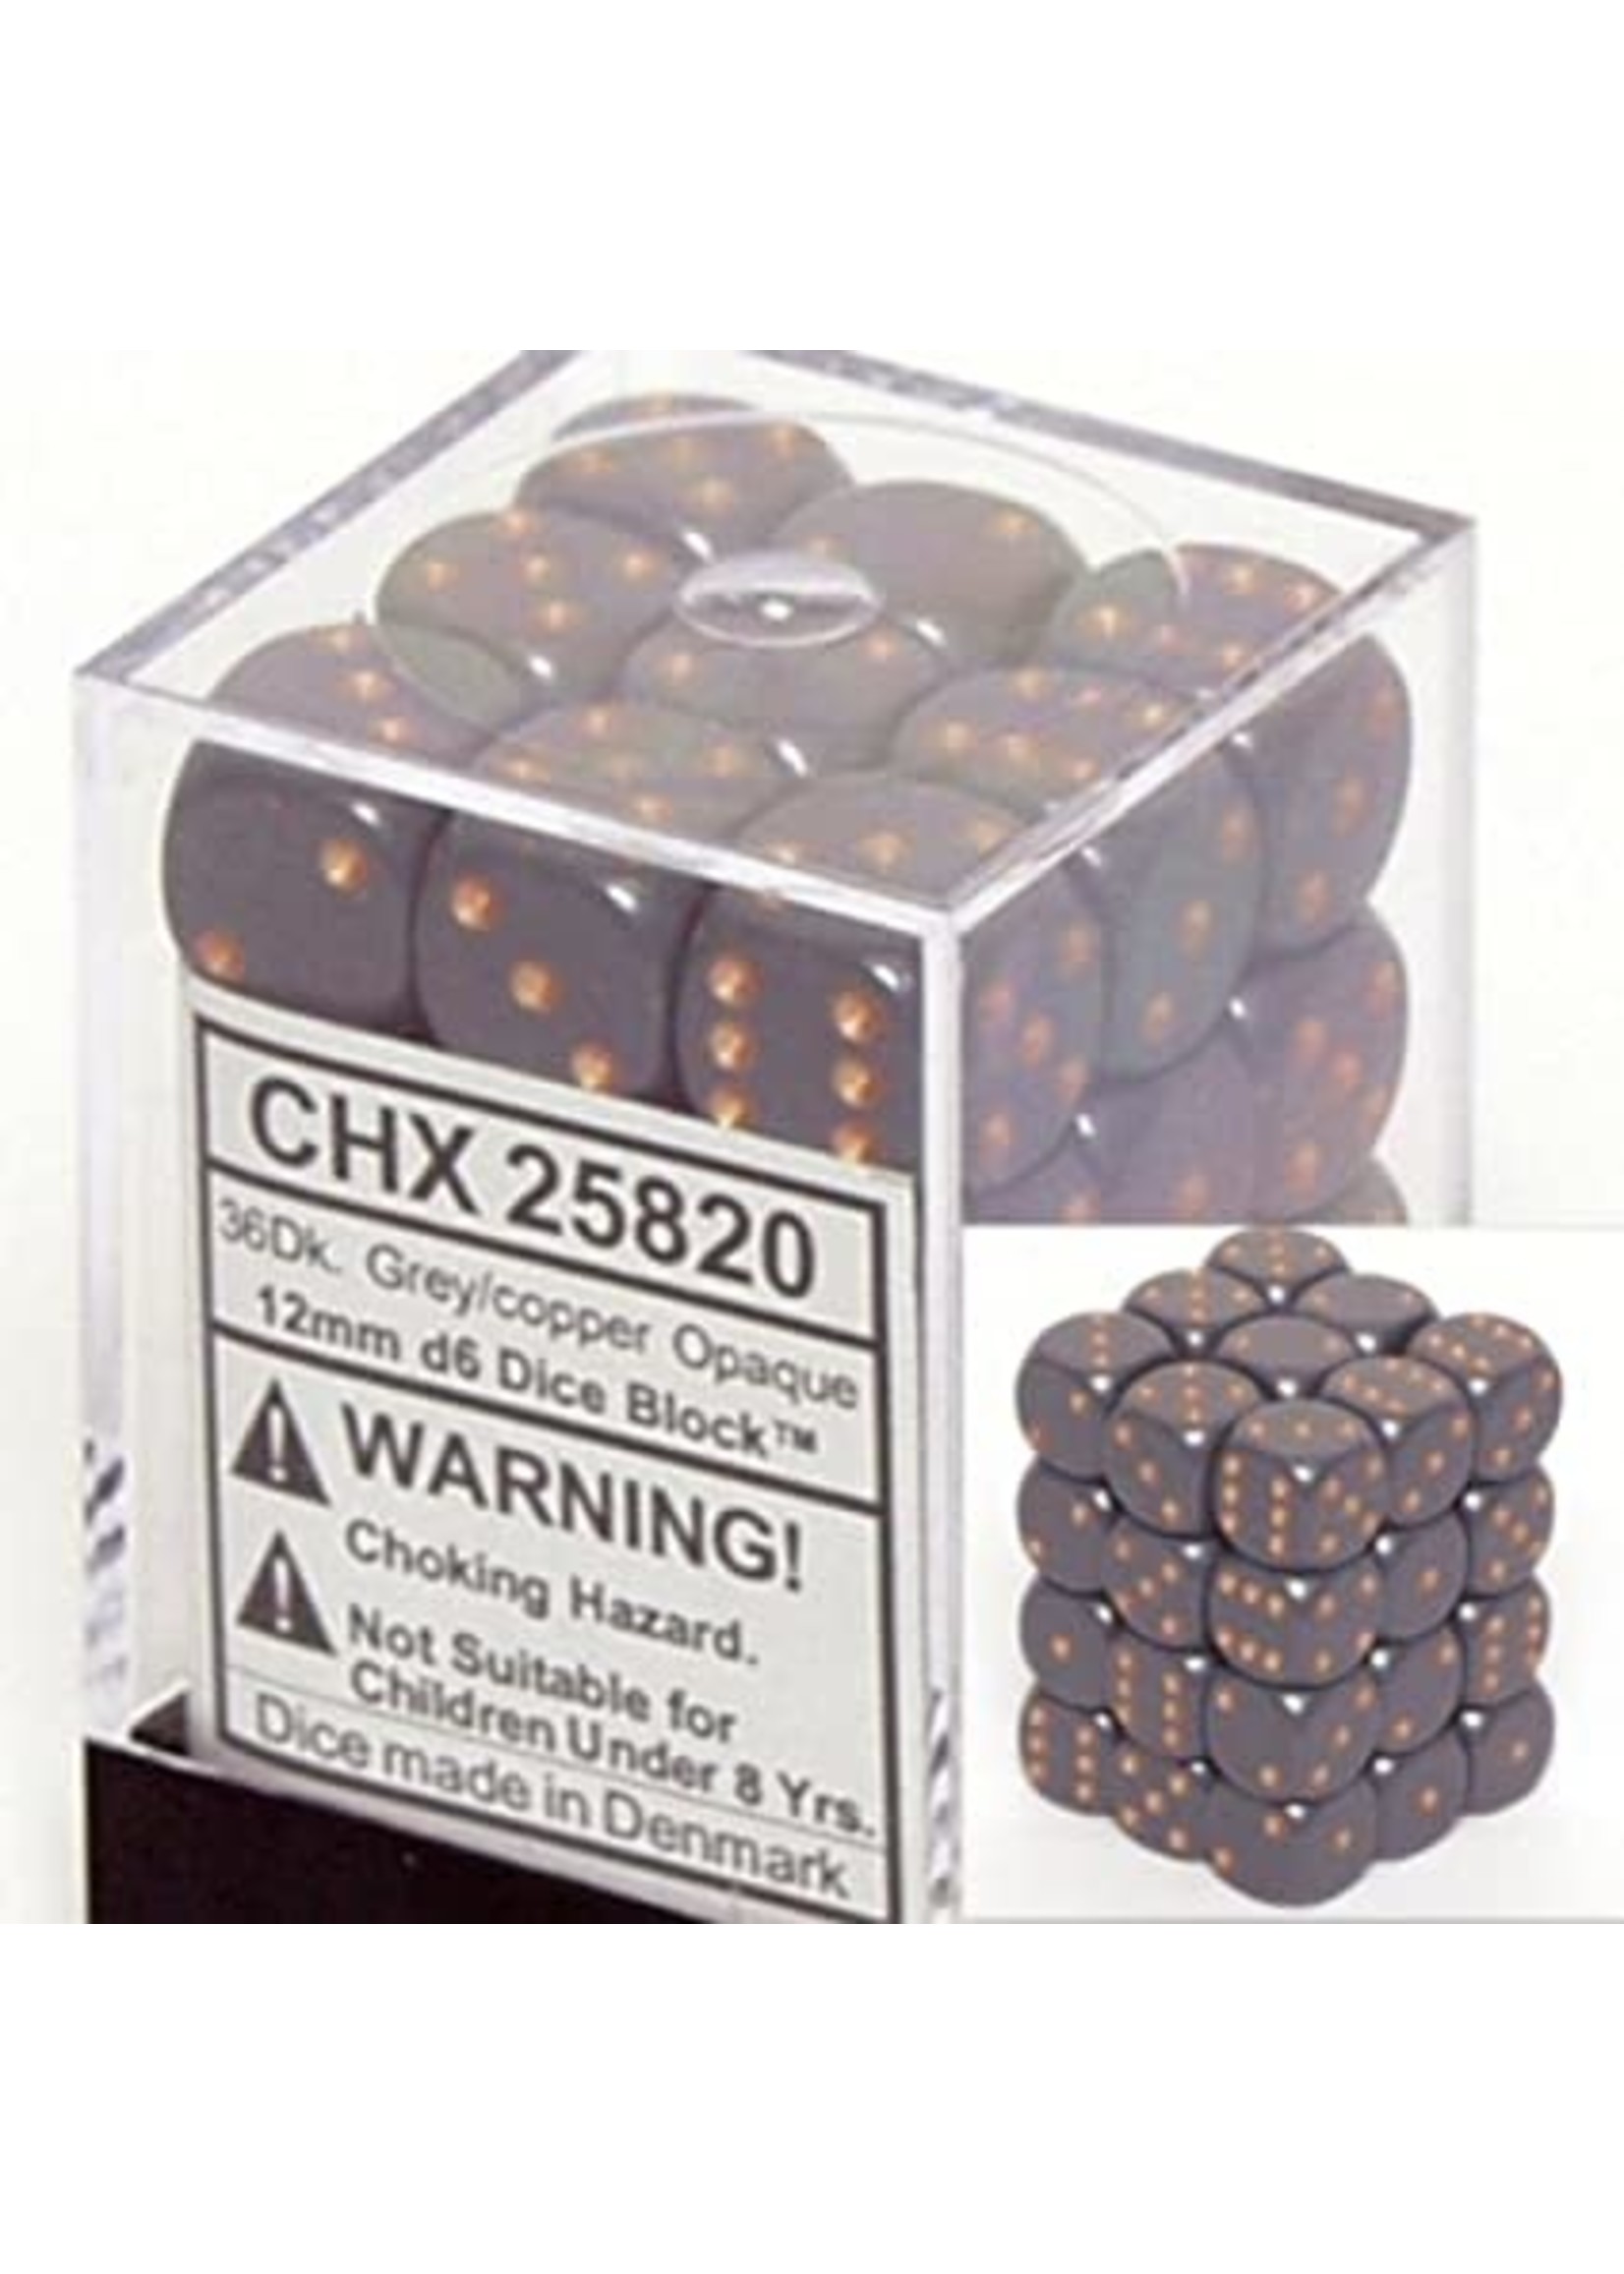 Chessex d6 Cube 12mm Opaque Grey w/ Copper (36)